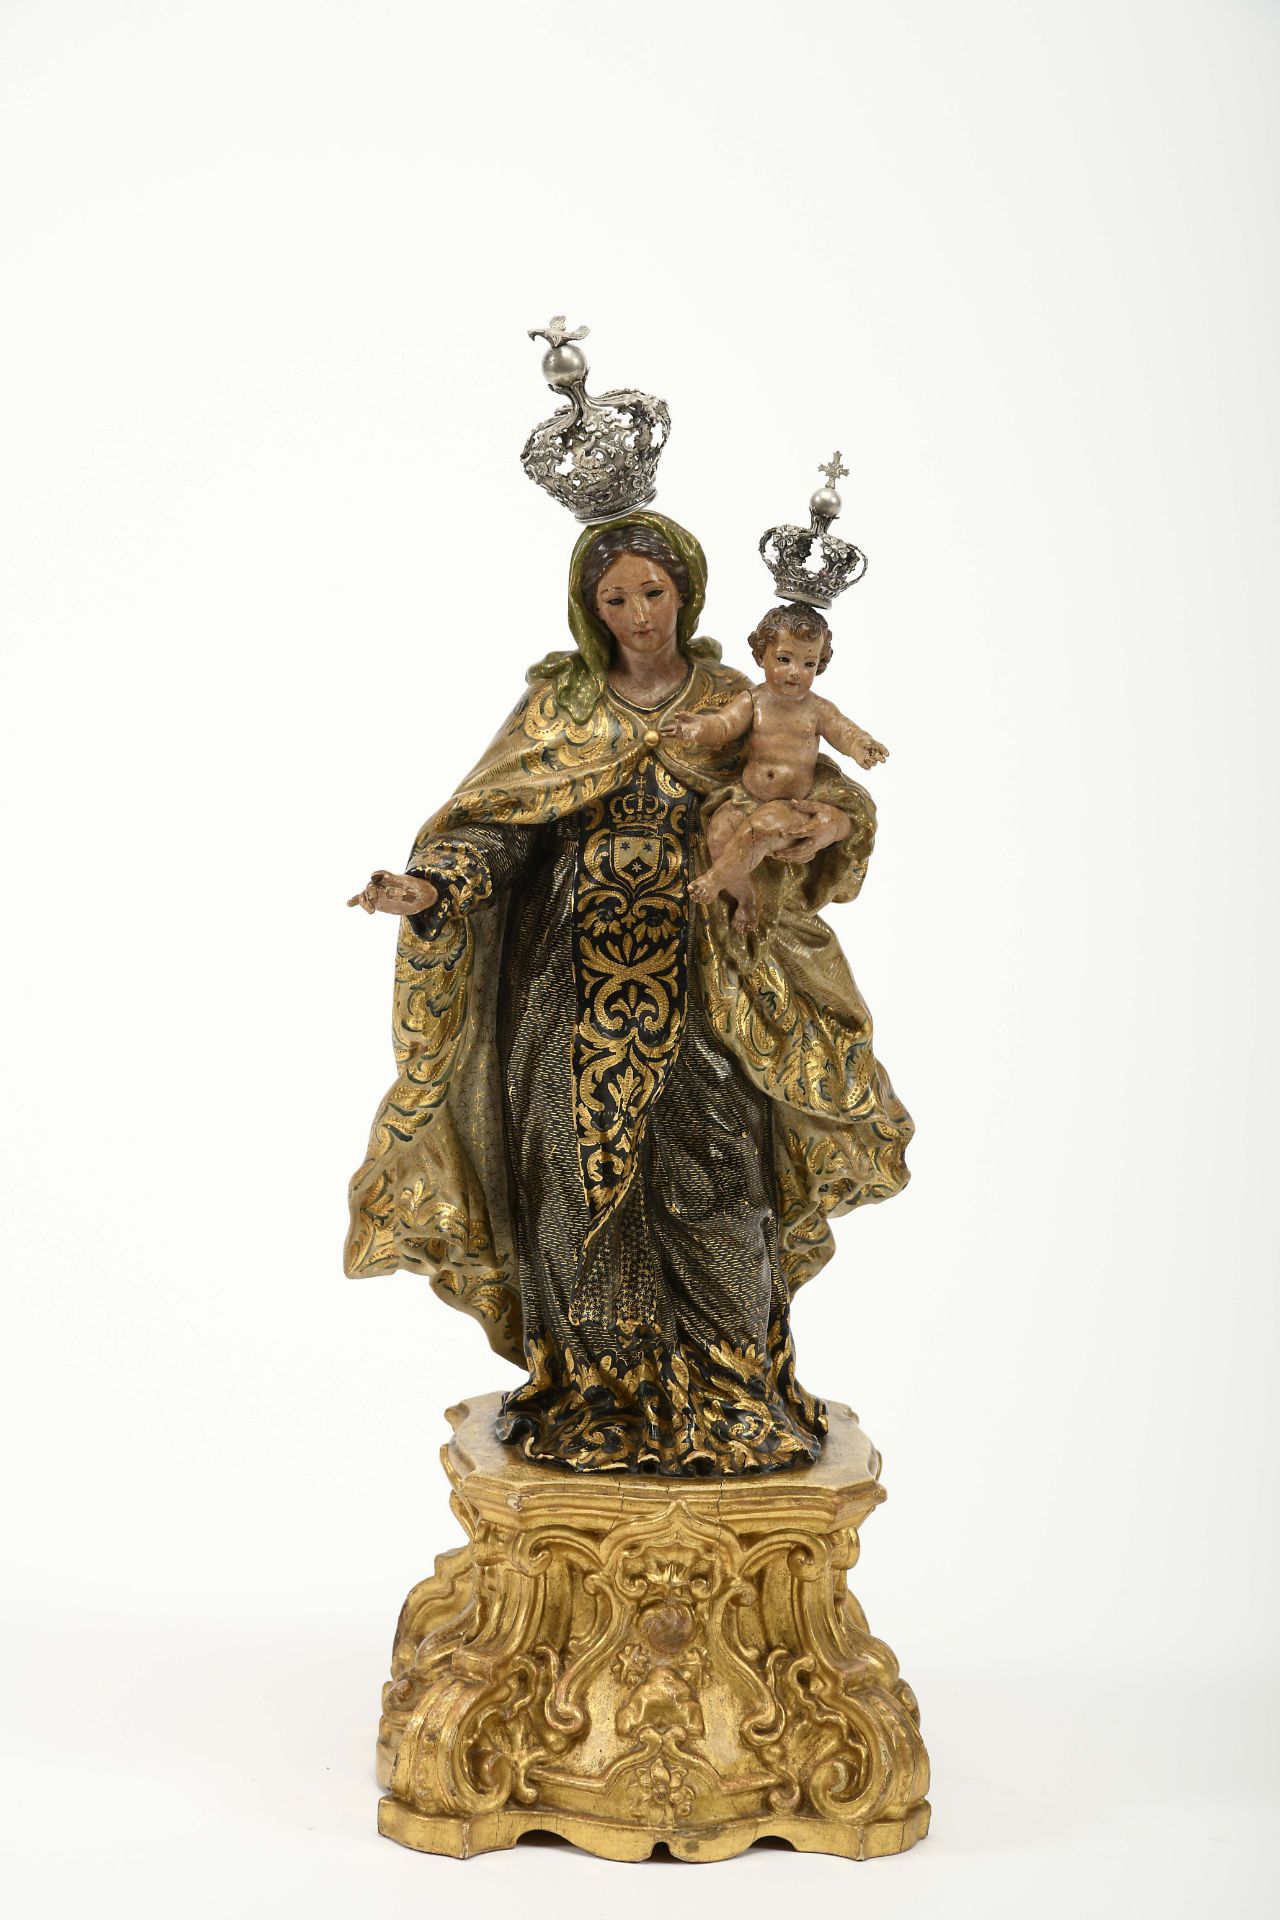 Our Lady of Mount Carmel with the Child Jesus